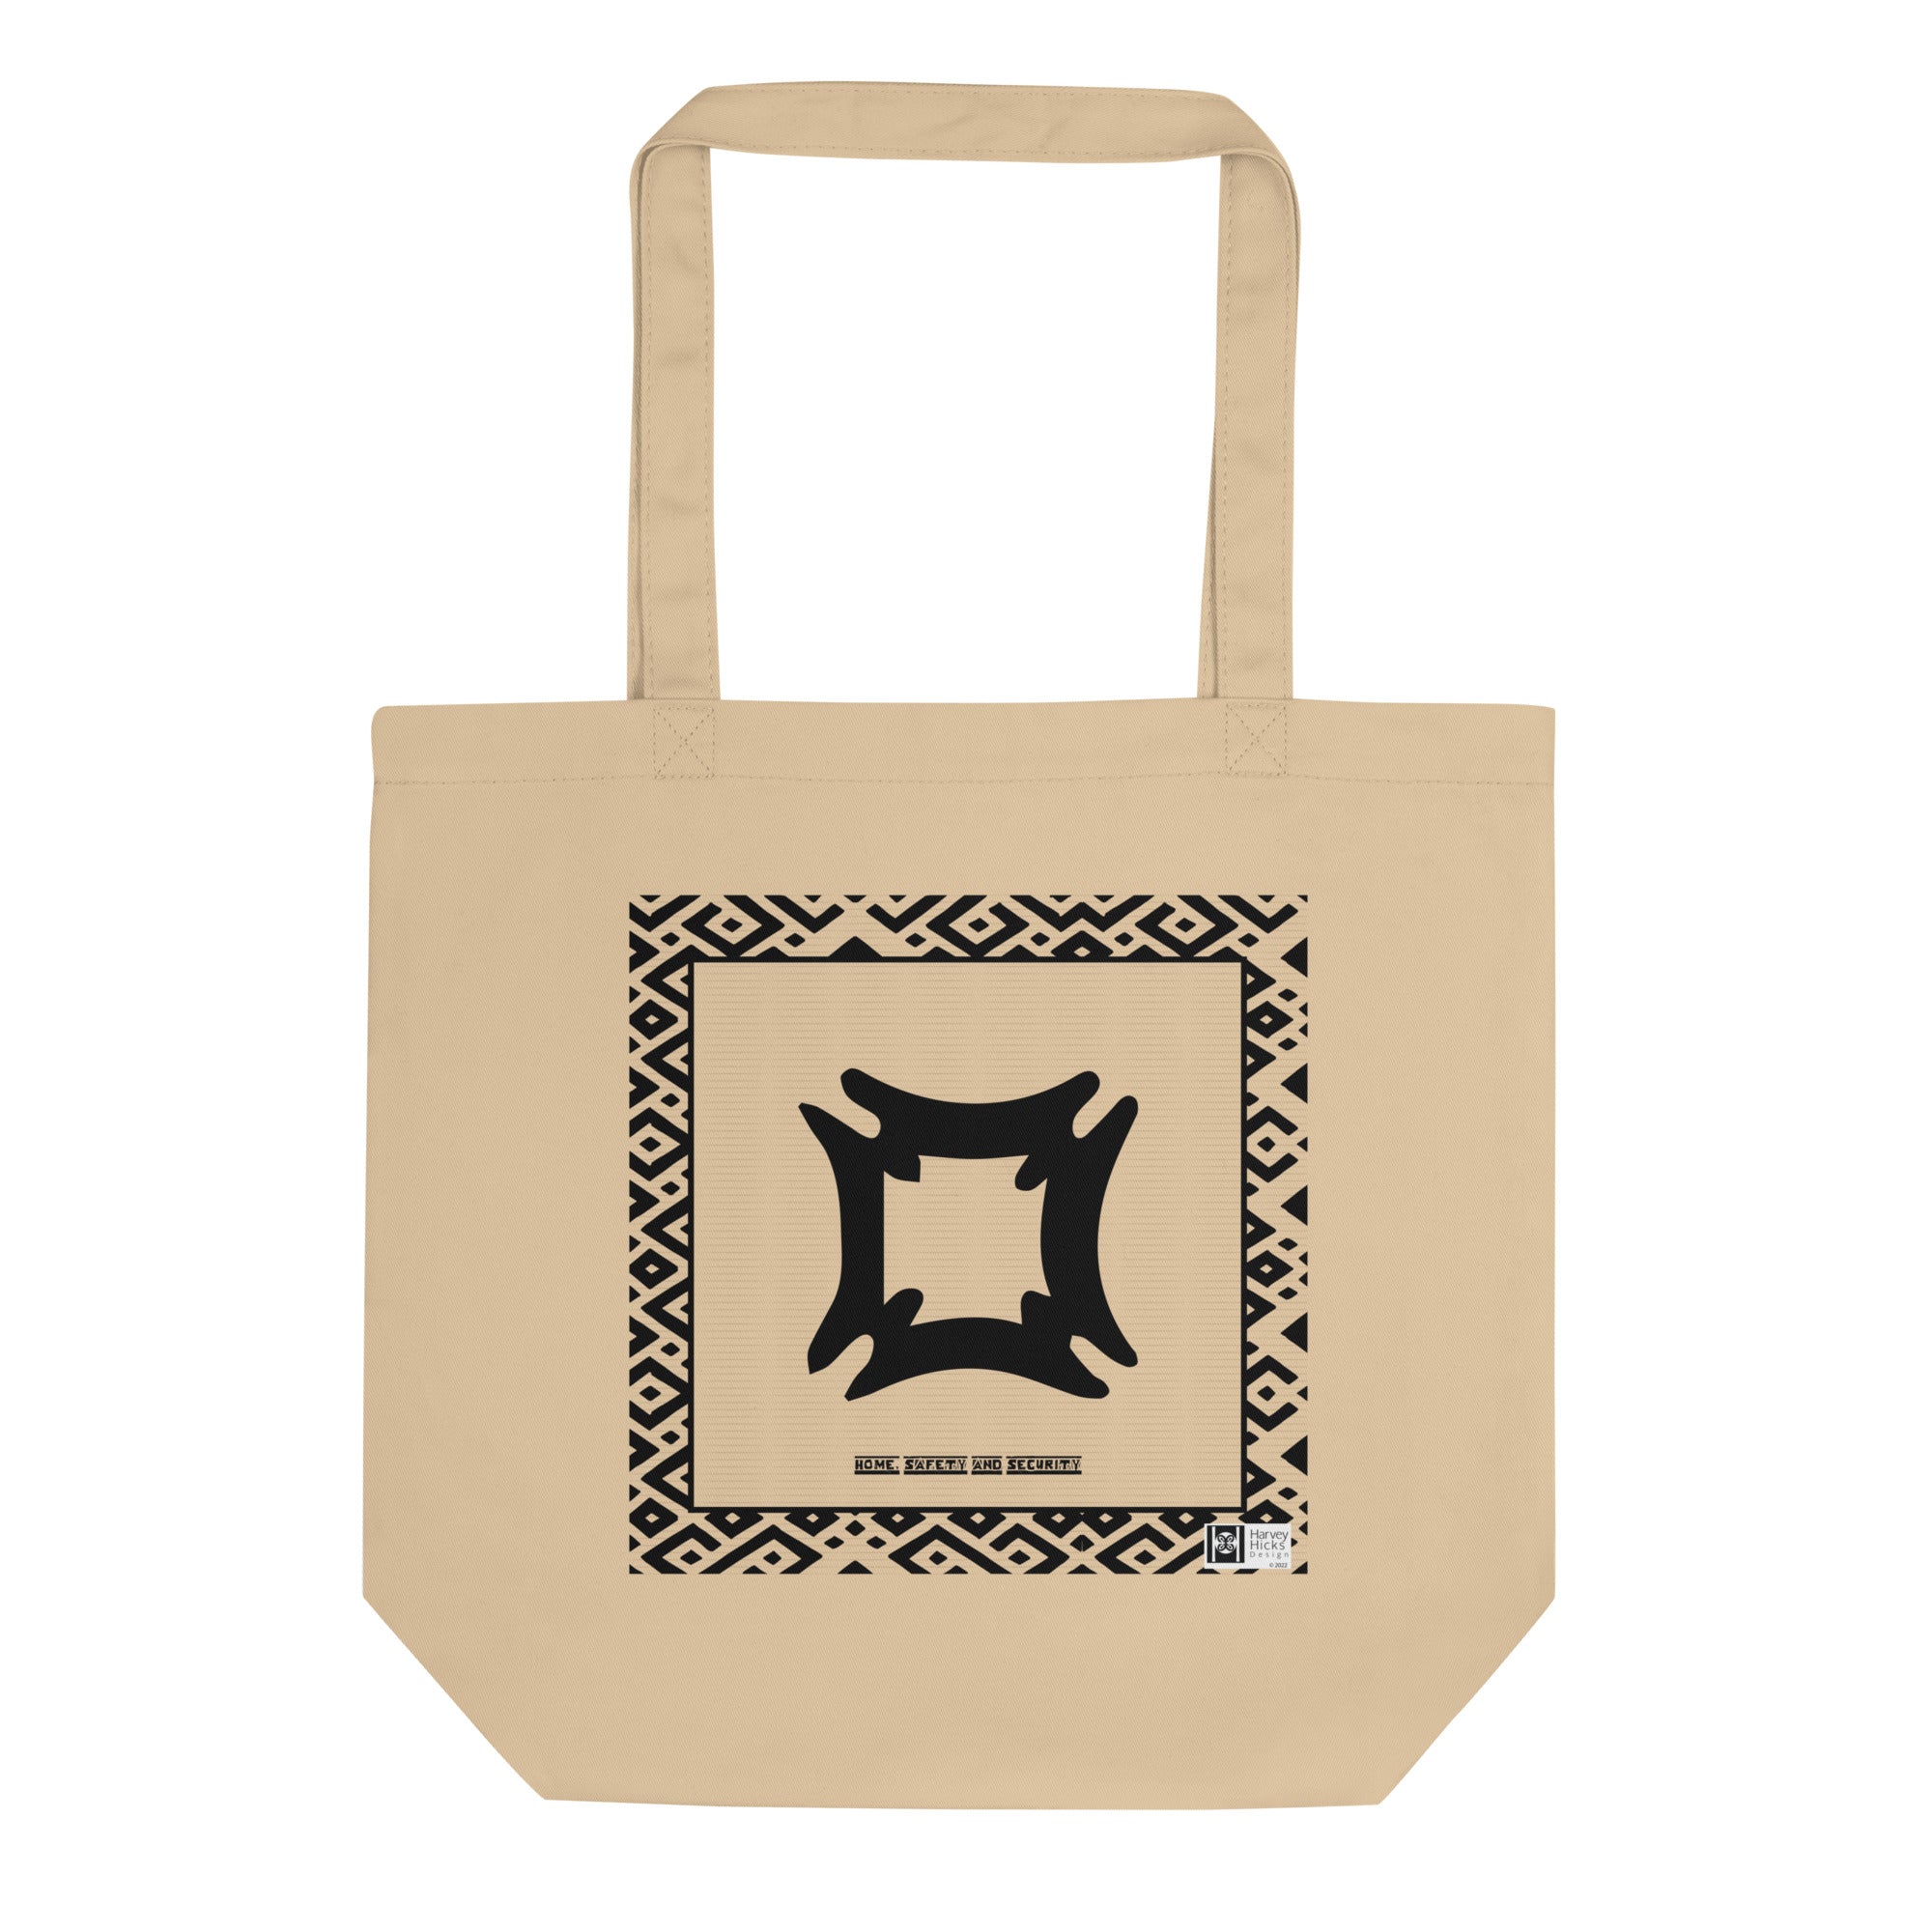 100% cotton Eco Tote Bag, featuring the Adinkra symbol for home